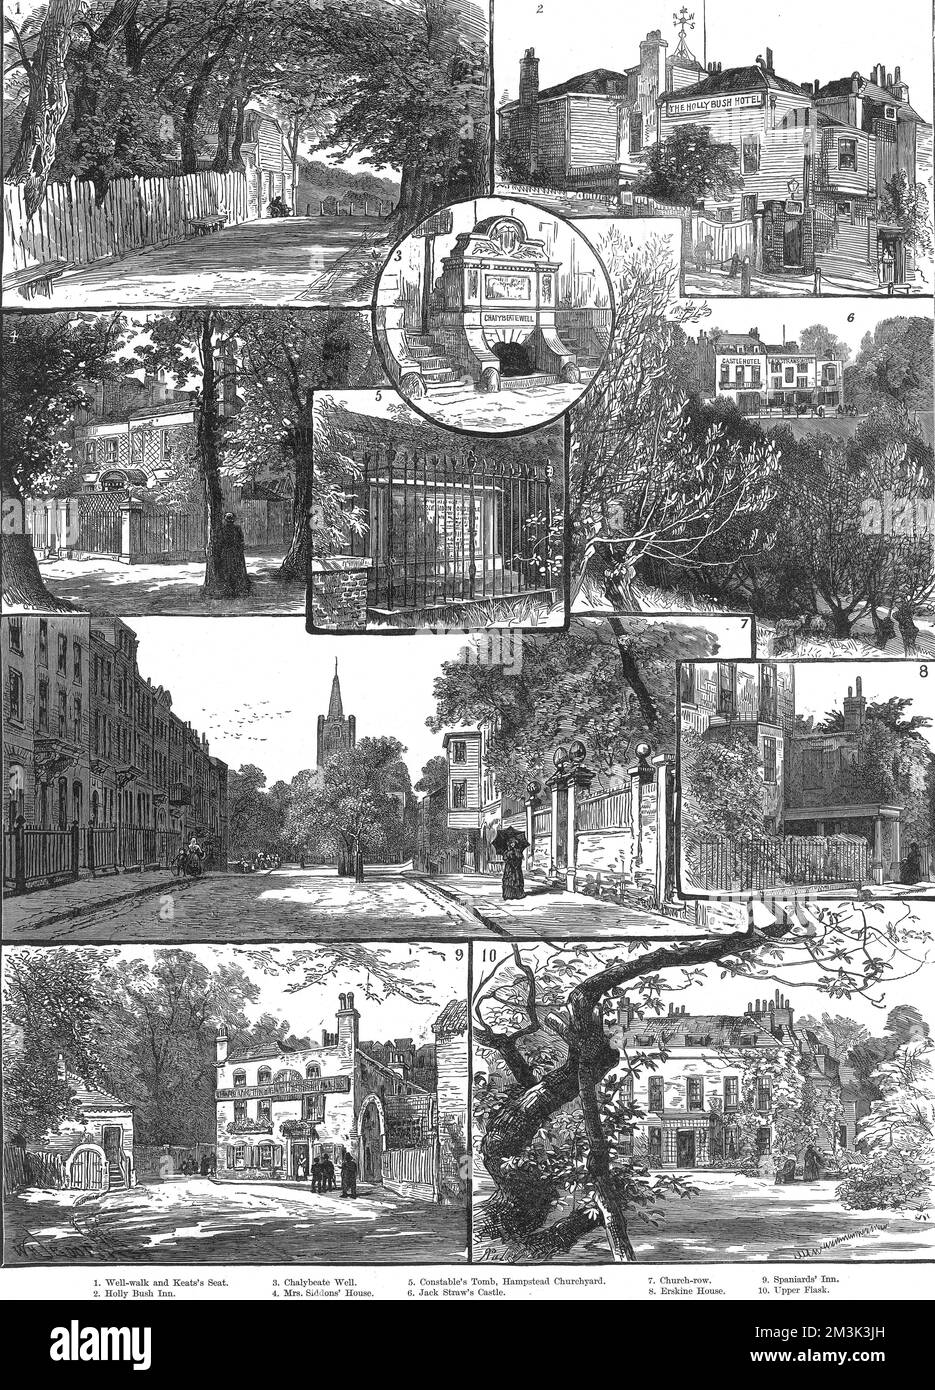 Series of scenes around Hampstead, in London, 1886.  The images show (clockwise from top left): Well Walk and Keat's Seat; Holly Bush Inn; Jack Straw's Castle; Erskine House; Upper Flask; Spaniard's Inn; Church Row; Mrs. Siddon's House. The two centre images are Chalybeate Well (top) and Constable's Tomb in Hampstead Churchyard.  1886 Stock Photo